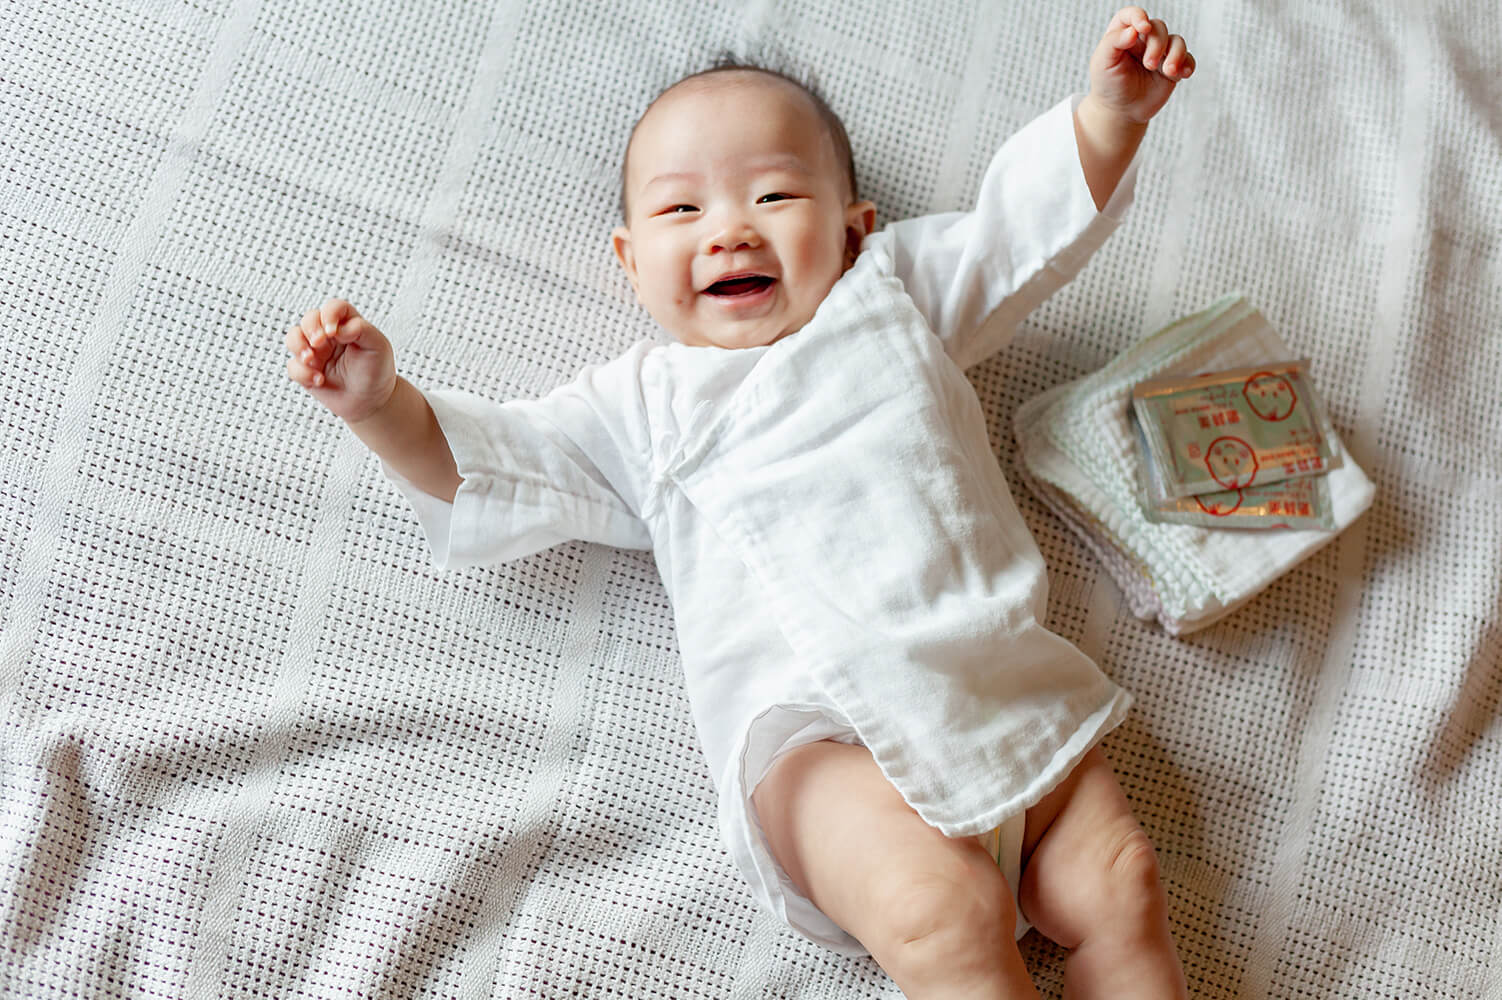 Happy baby wearing Suzuran Baby Gauze Short Undershirt with Gauze Handkerchief and Wet Cleaning Cotton (baby oral wipes).